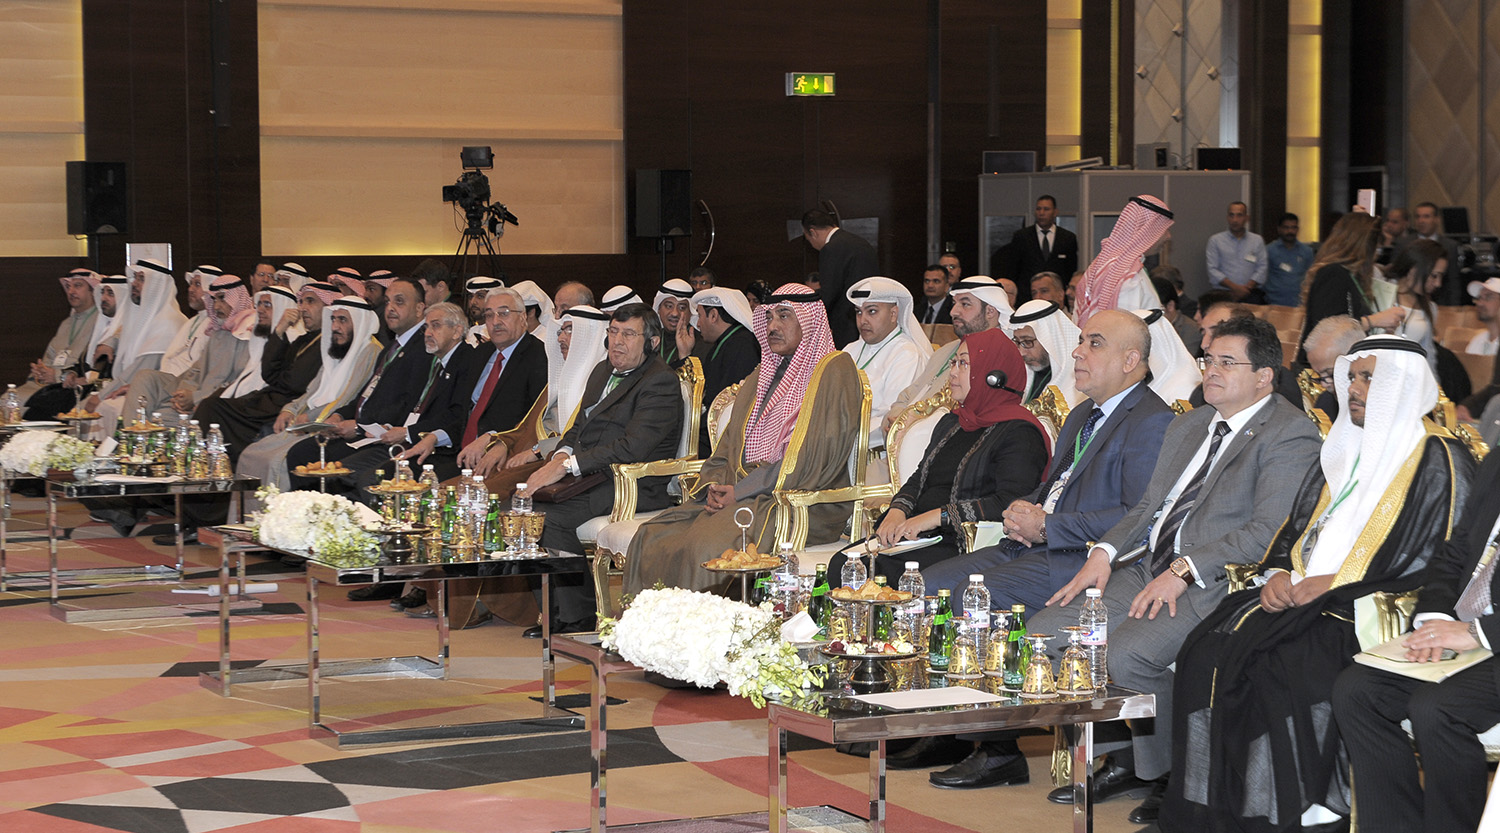 The NGOs Conference to Support the Humanitarian Situation in Iraq convened at the attendance of Deputy Premier and Foreign Minister Sheikh Sabah Khaled Al-Hamad Al-Sabah